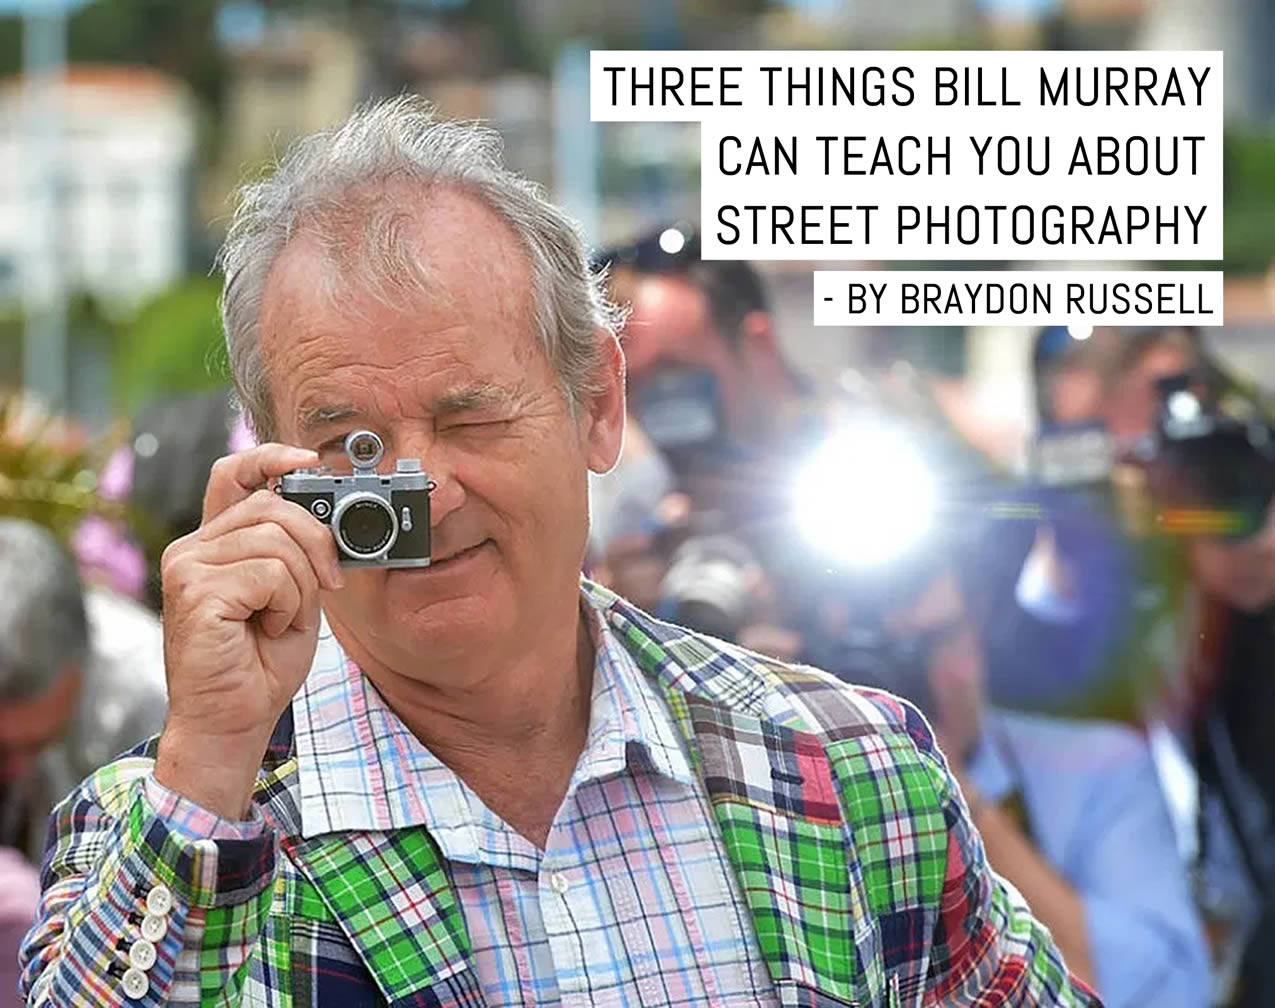 Three things Bill Murray can teach you about street photography